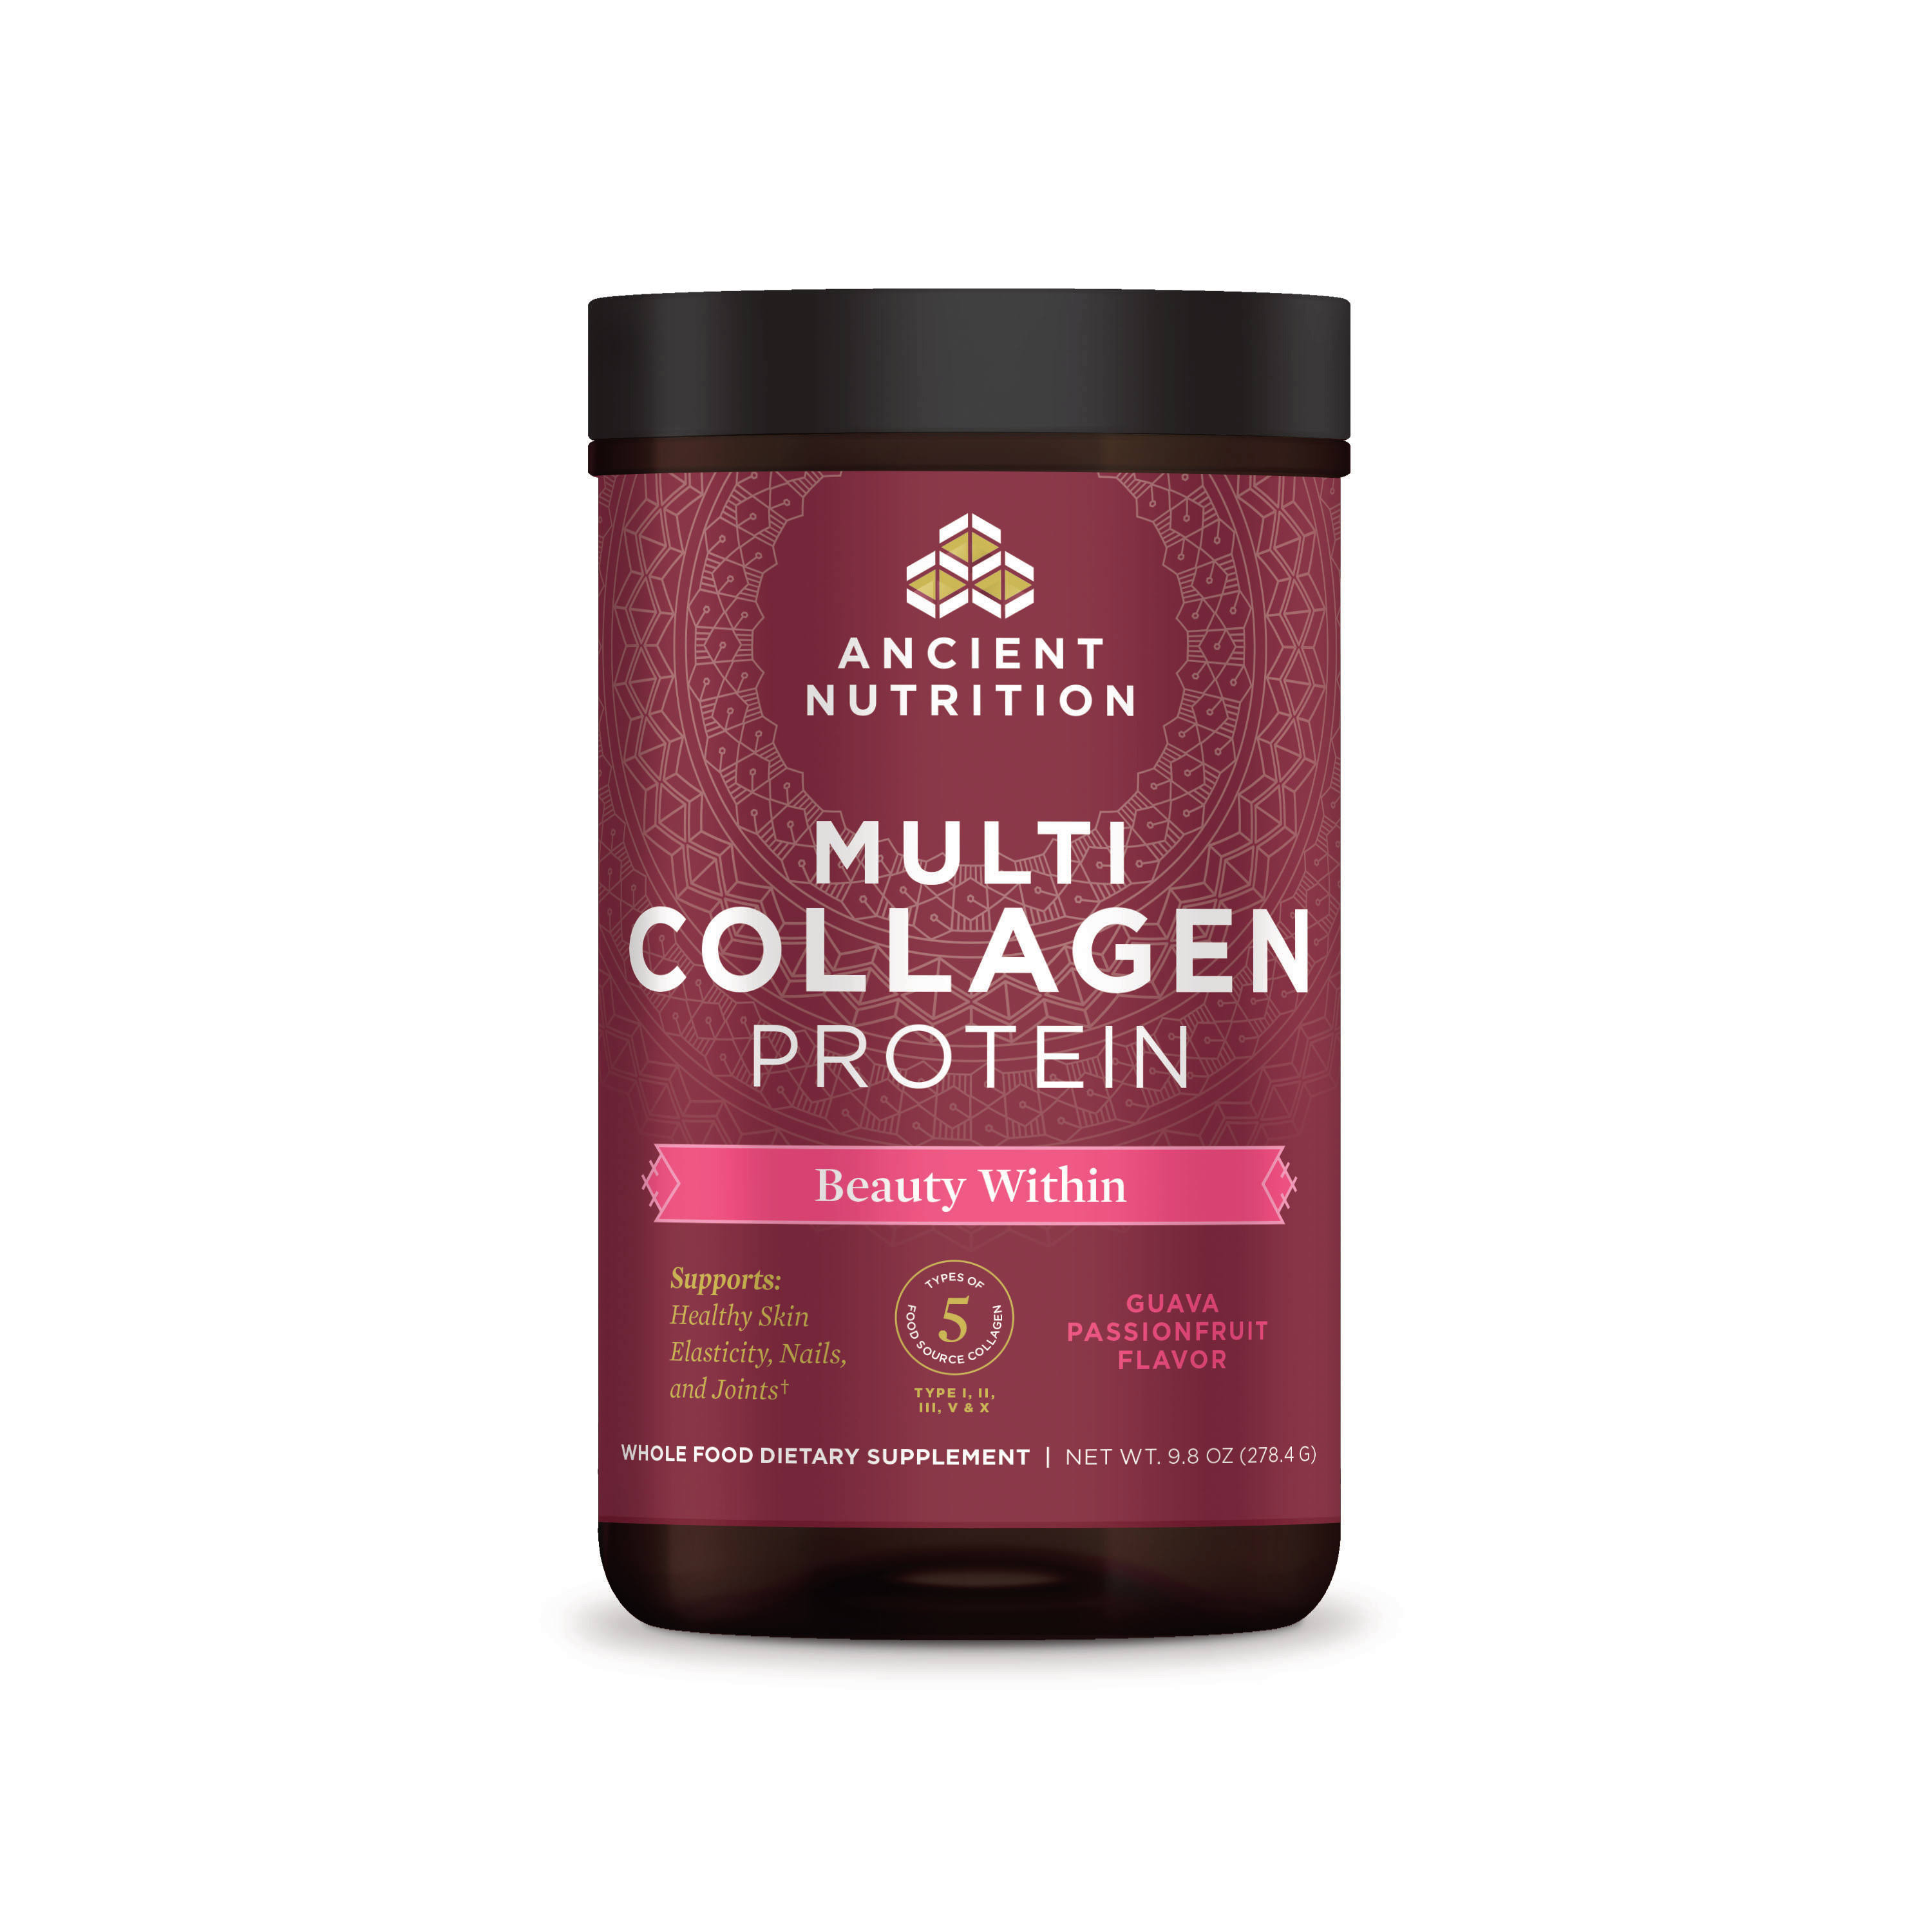 Ancient Nutrition Beauty Within Multi Collagen Protein Powder - 276g